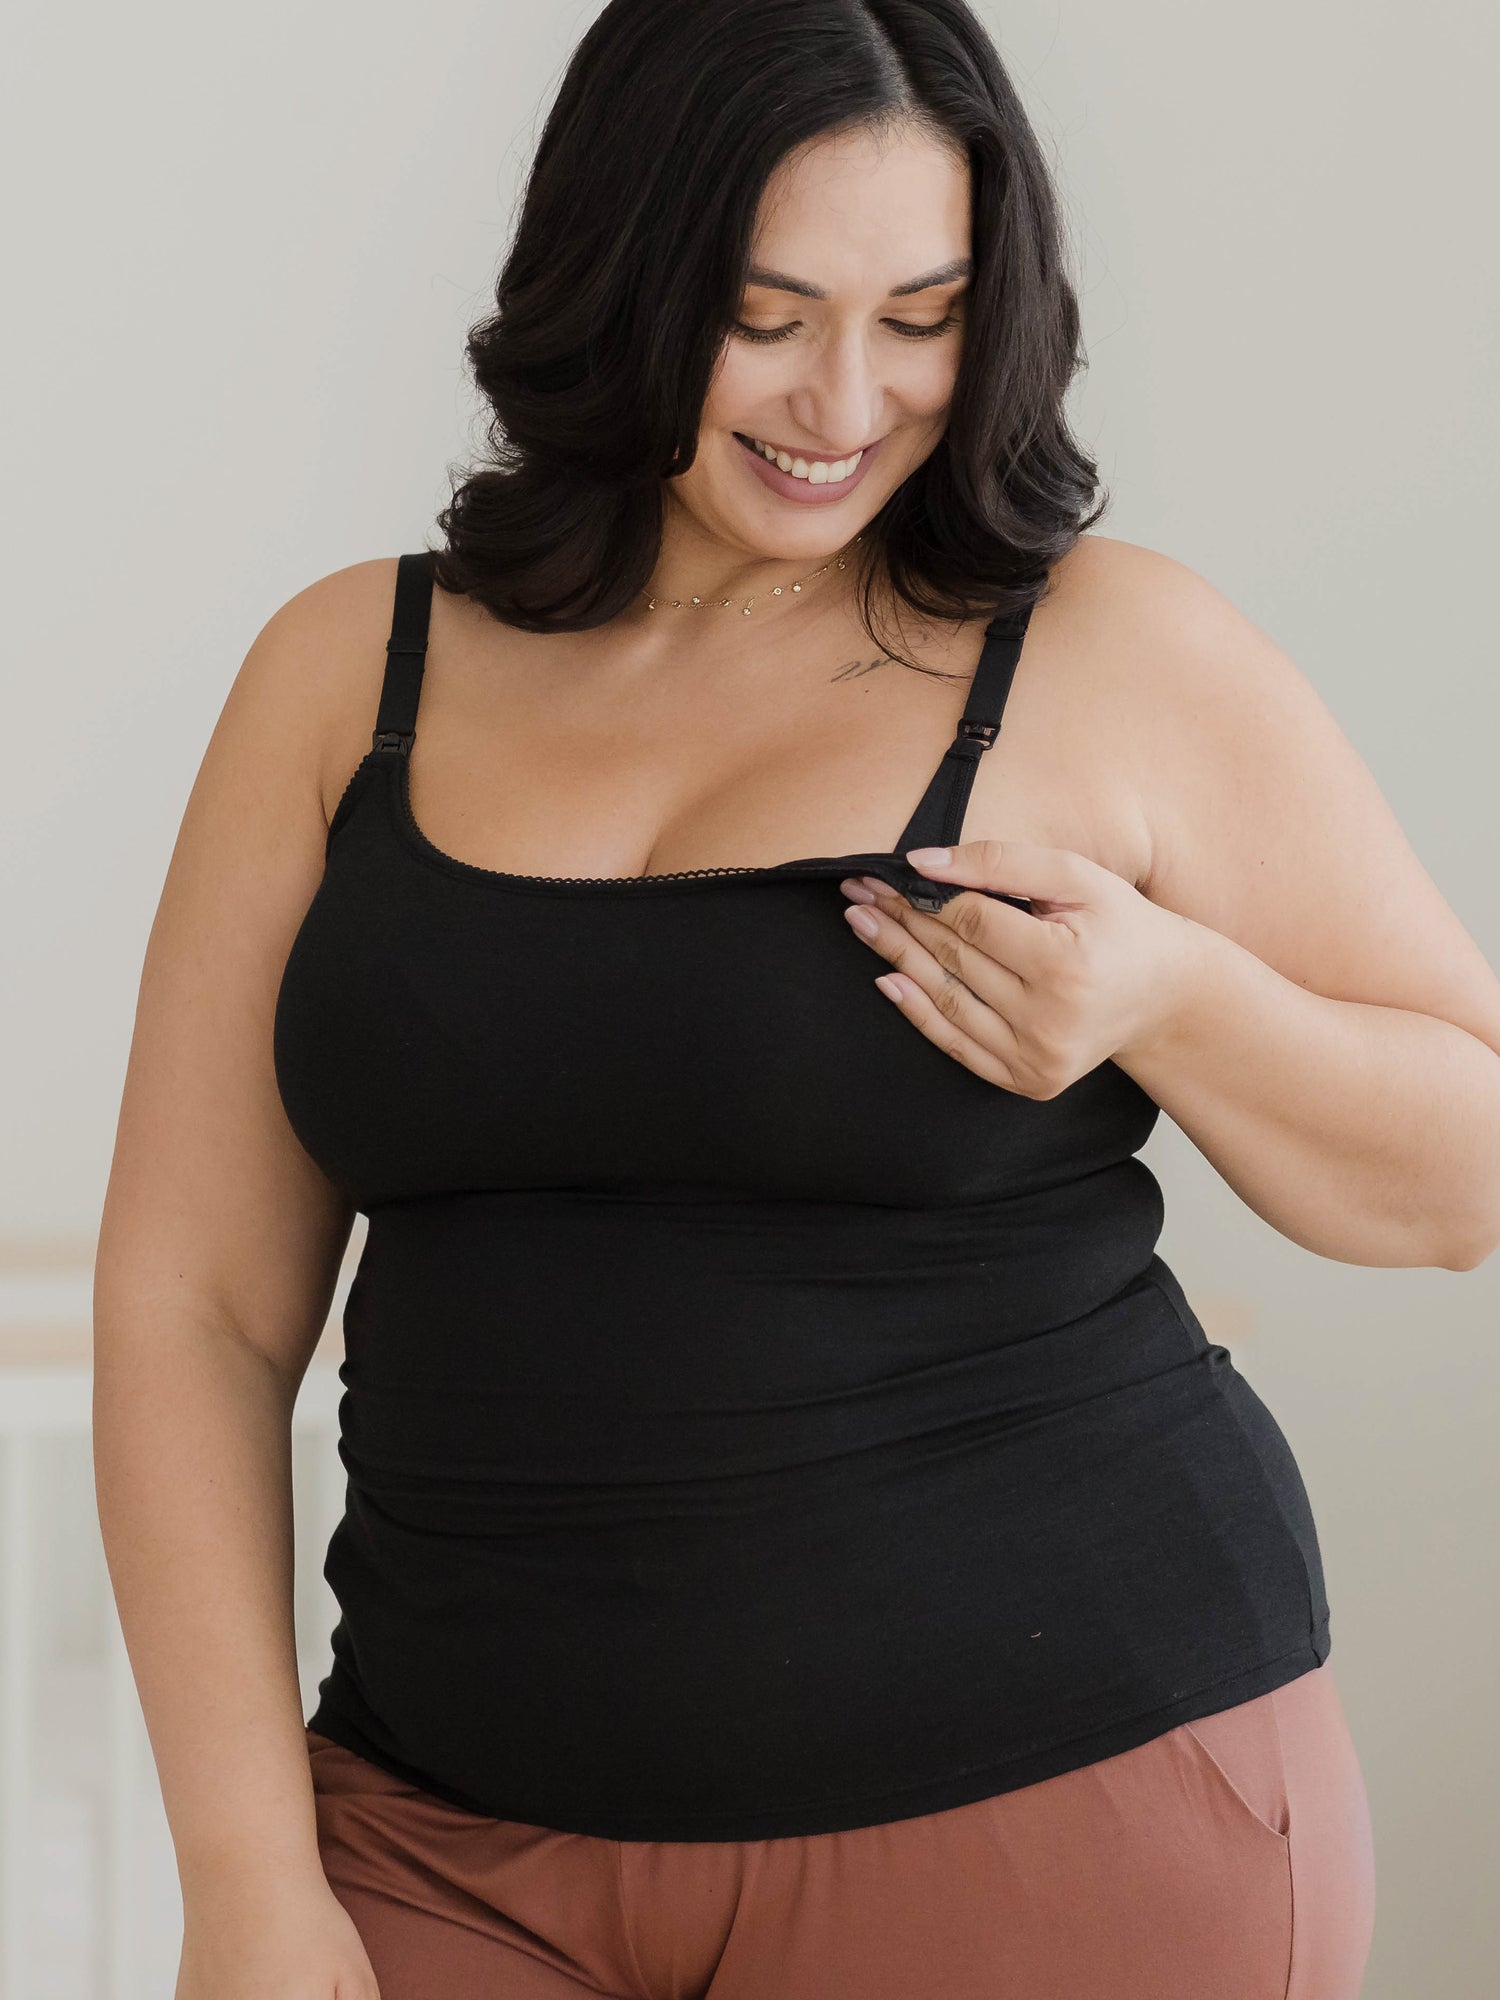 Cropped in image of model wearing the Picot Trim Nursing Camisole in Black, showing nursing access.